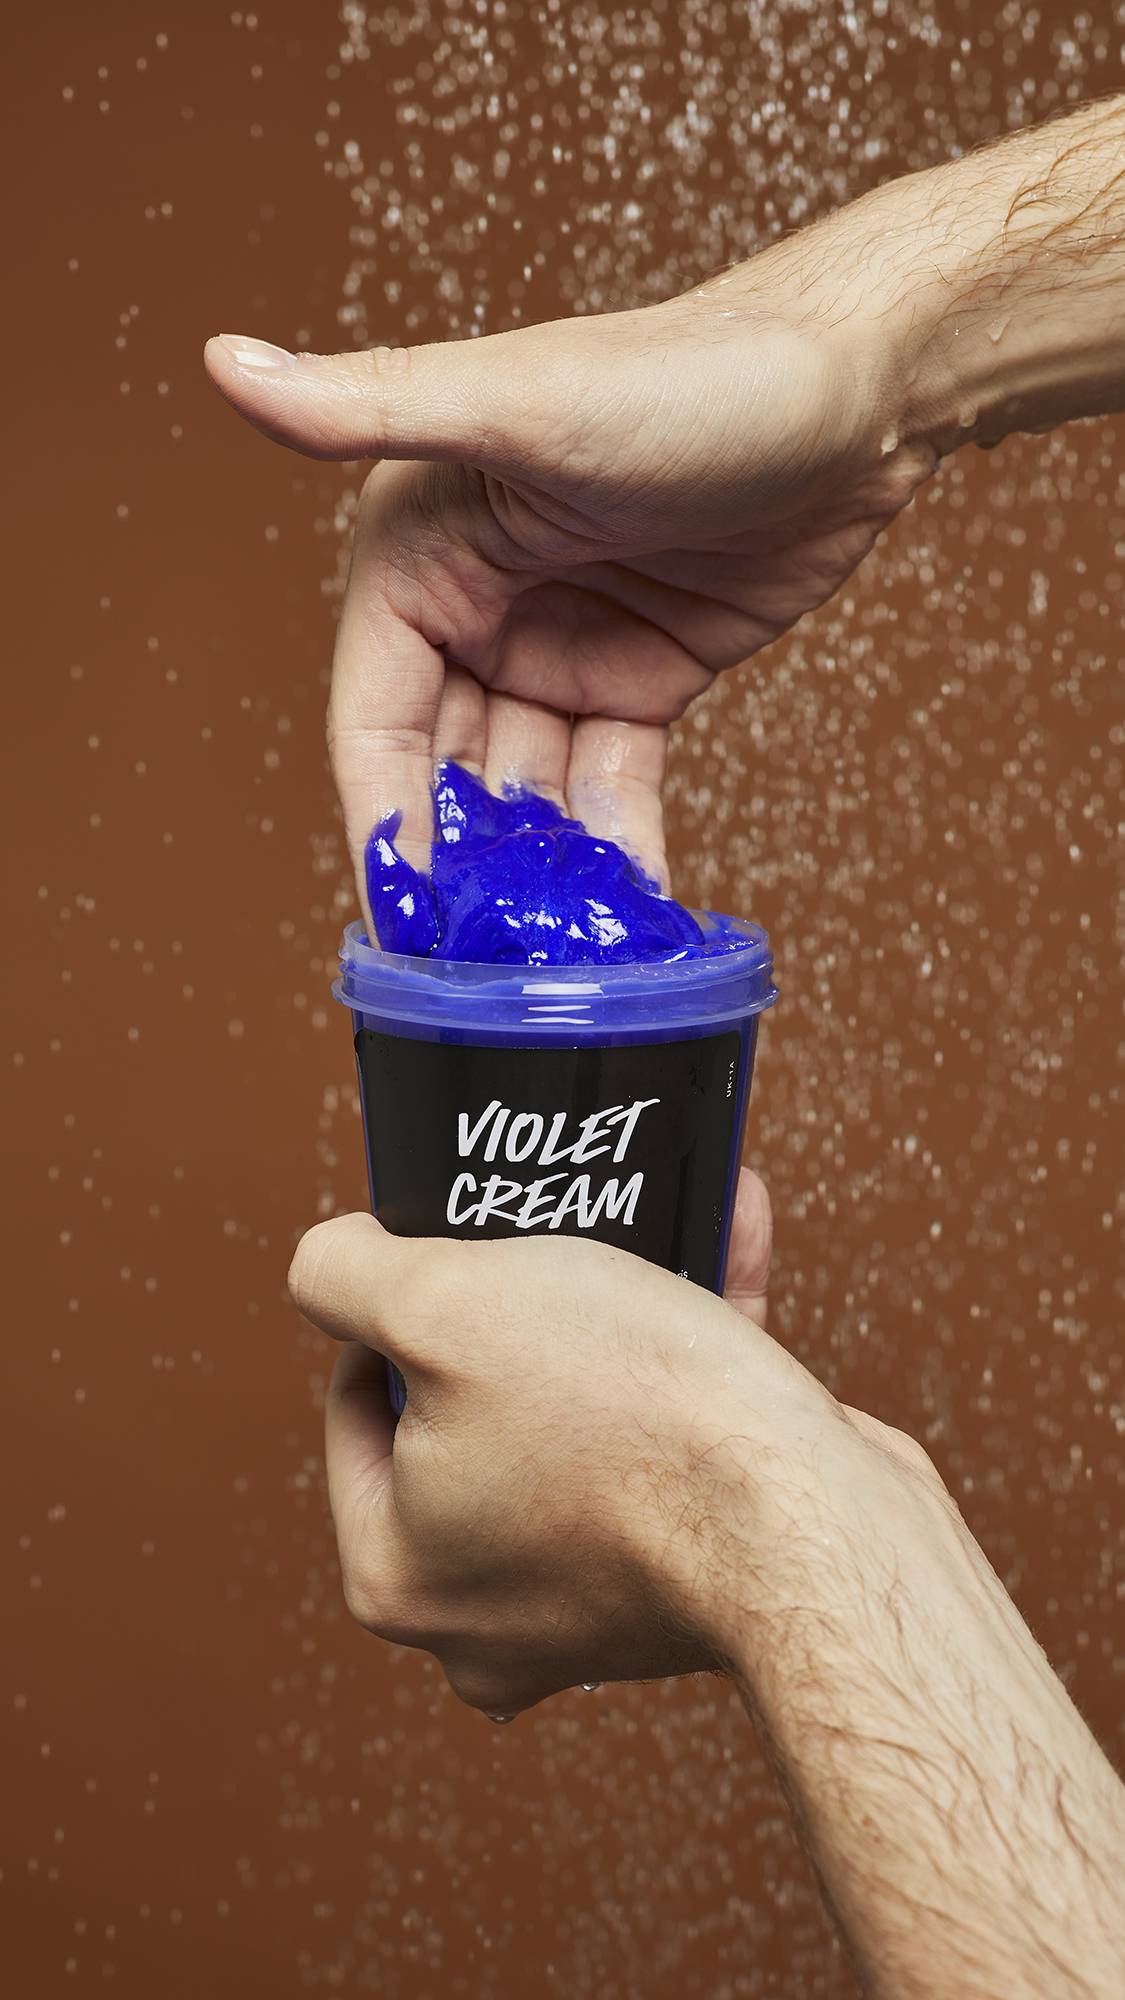 A close-up image of model scooping the vibrant Violet Cream shampoo out of the LUSH pot under running shower water.